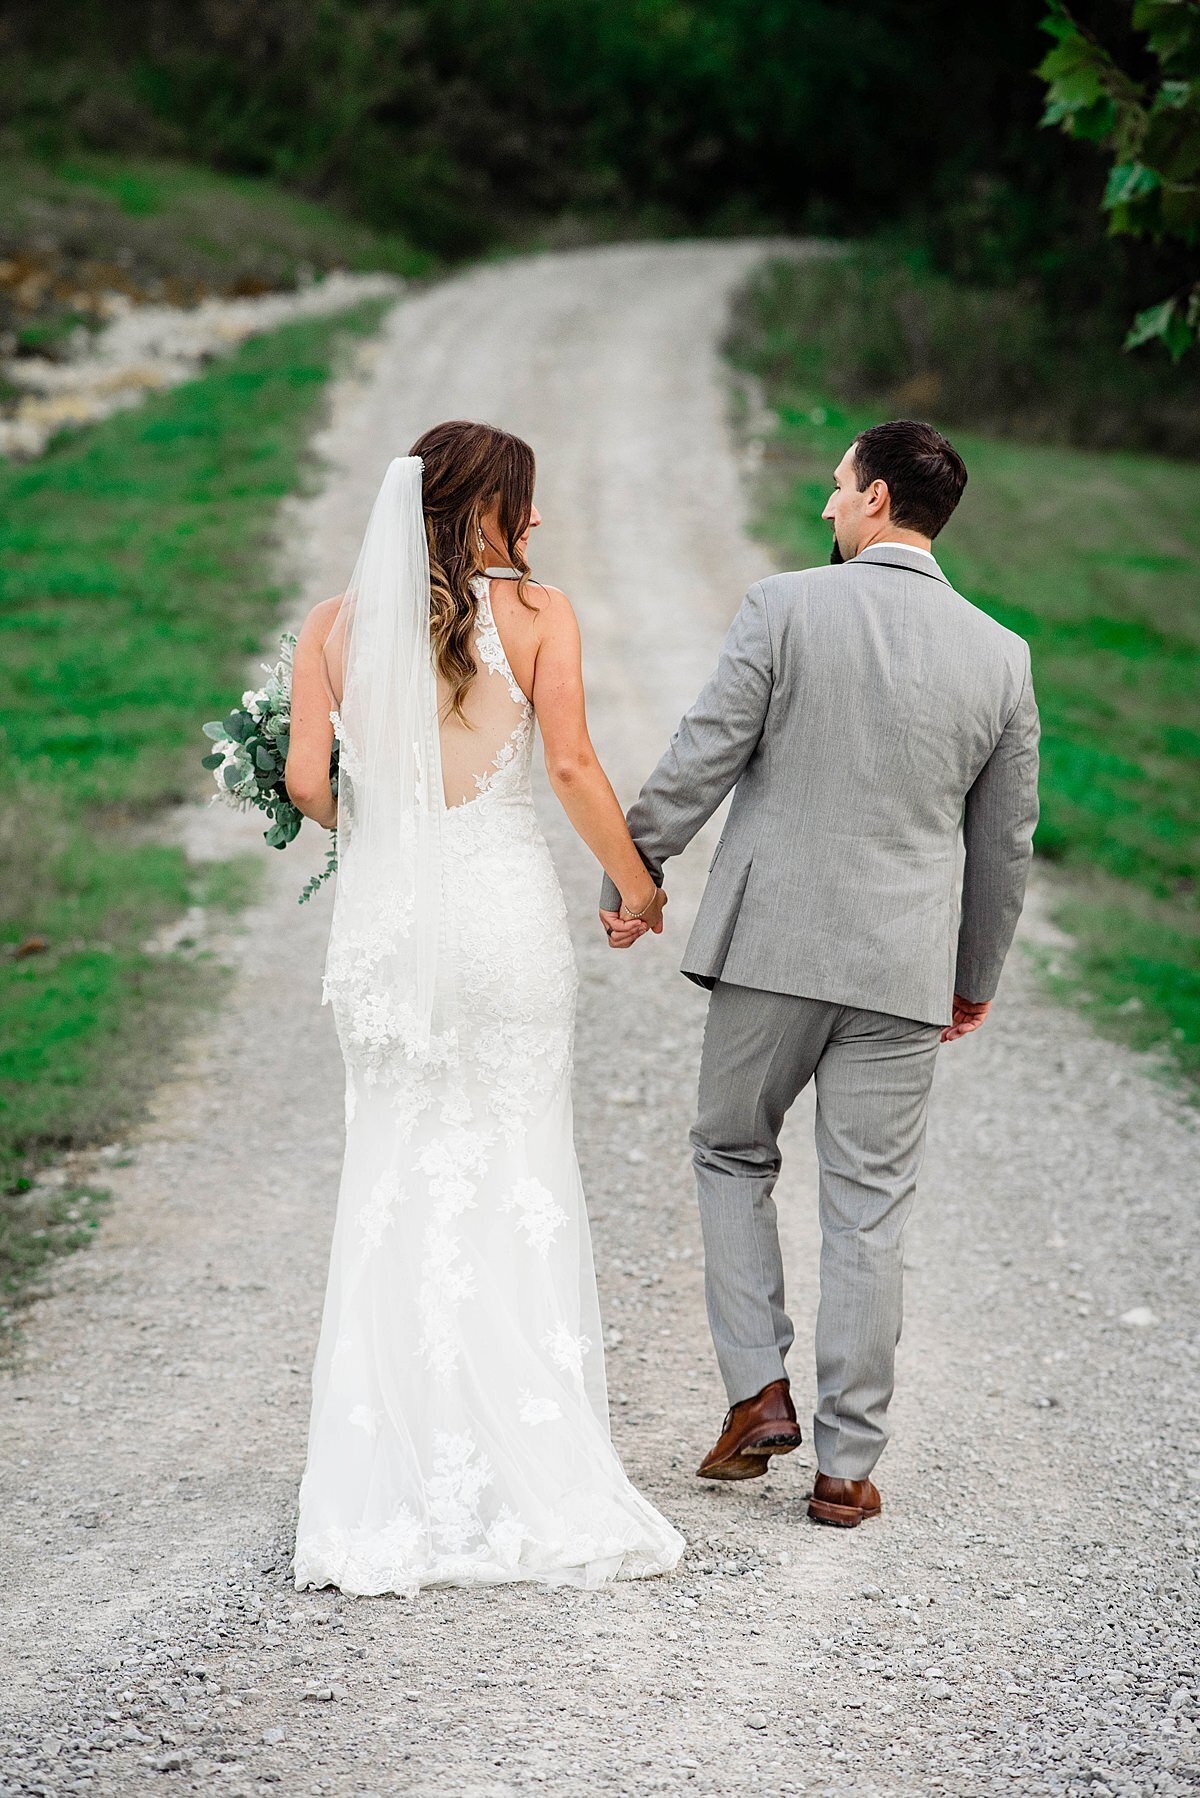 The bride and groom walk away from the camera down a gravel path. with greenery and tress on either side. The  groom is wearing a light gray suit with brown shoes.  The bride is wearing a fitted lace wedding dress with an illusion back and a sweep train. She has a fingertip length veil and a bouquet of greenery and white flowers. They are holding hands as they walk away.